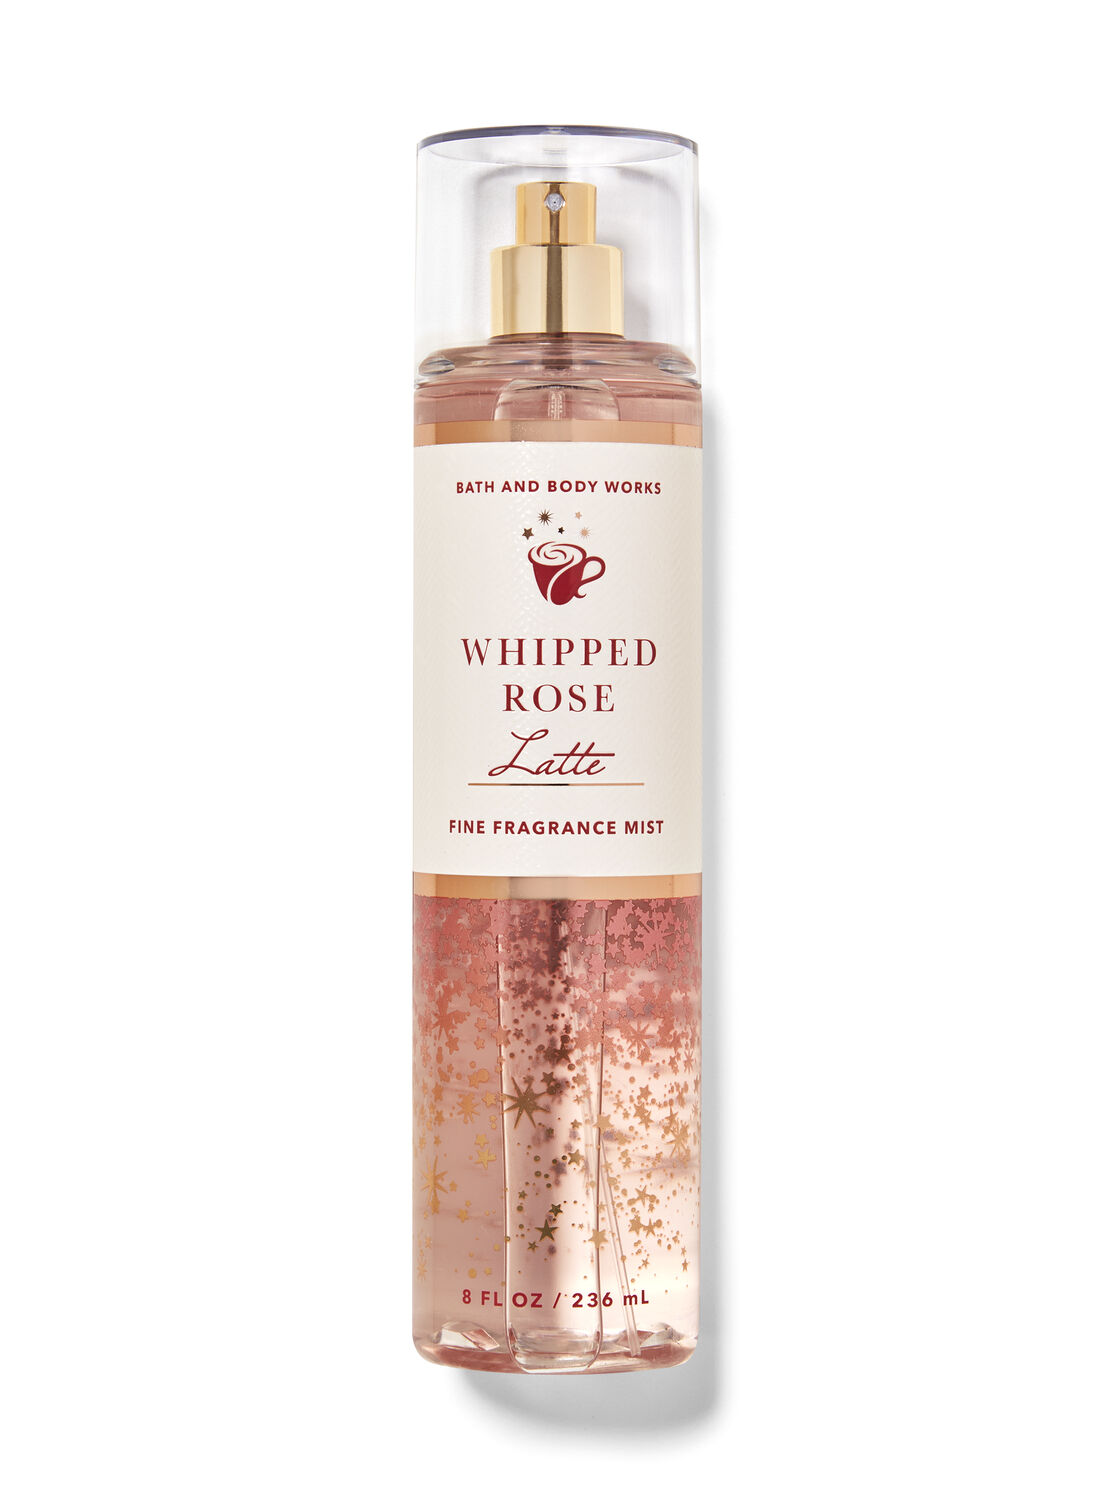 bath and body works mist フレグランスミスト